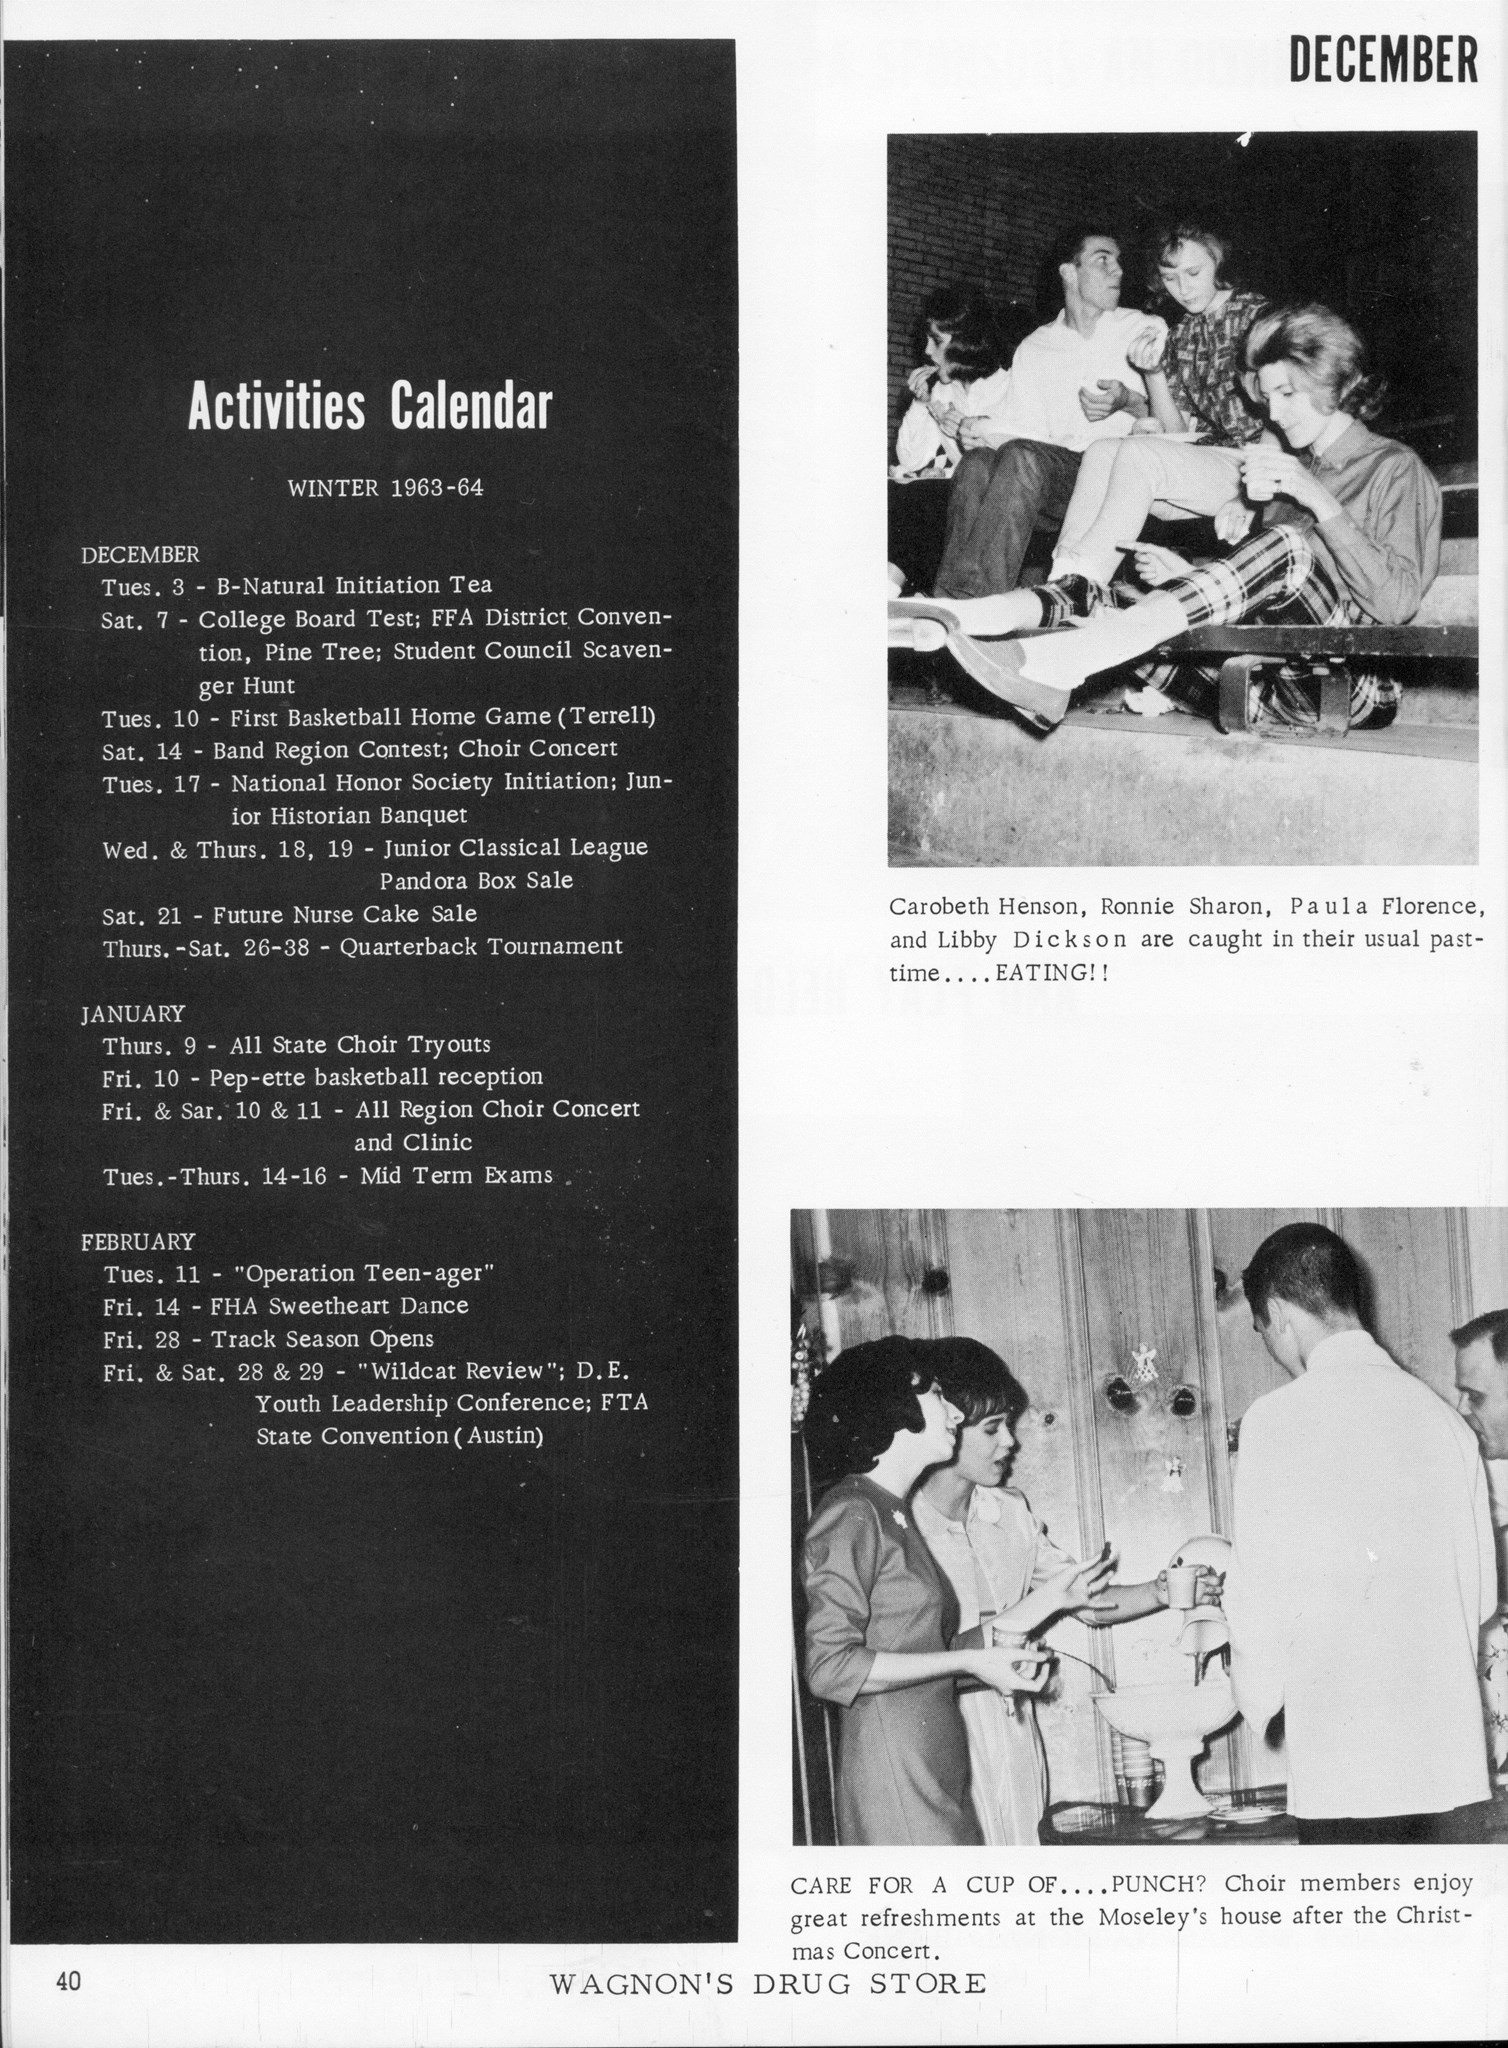 ../../../Images/Large/1964/Arclight-1964-pg0040.jpg